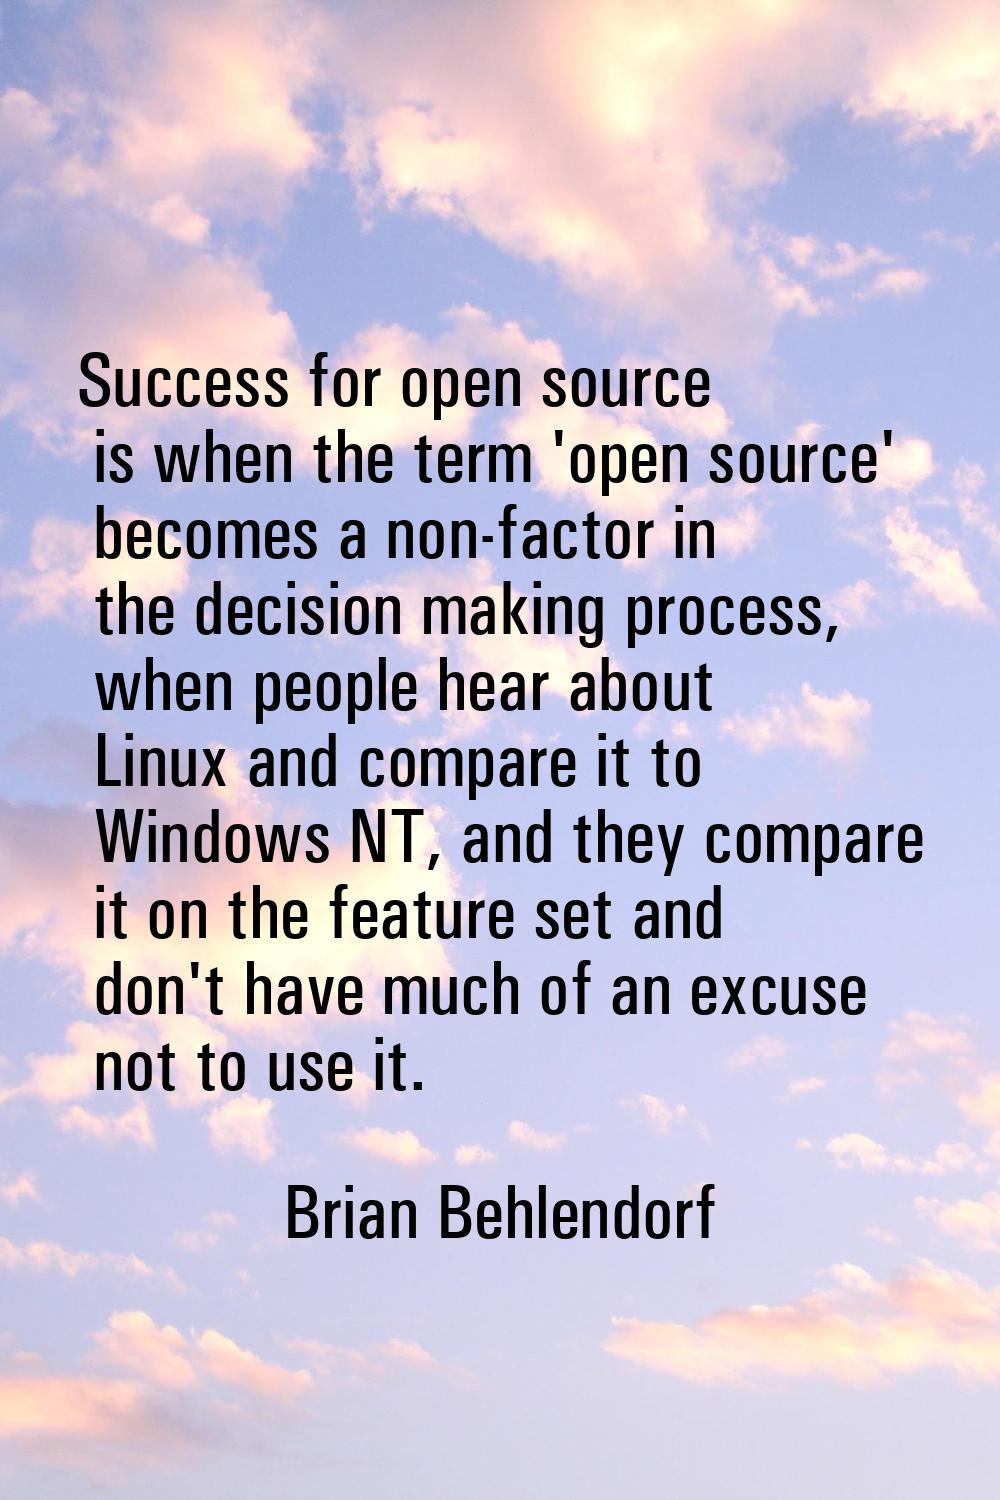 Success for open source is when the term 'open source' becomes a non-factor in the decision making 